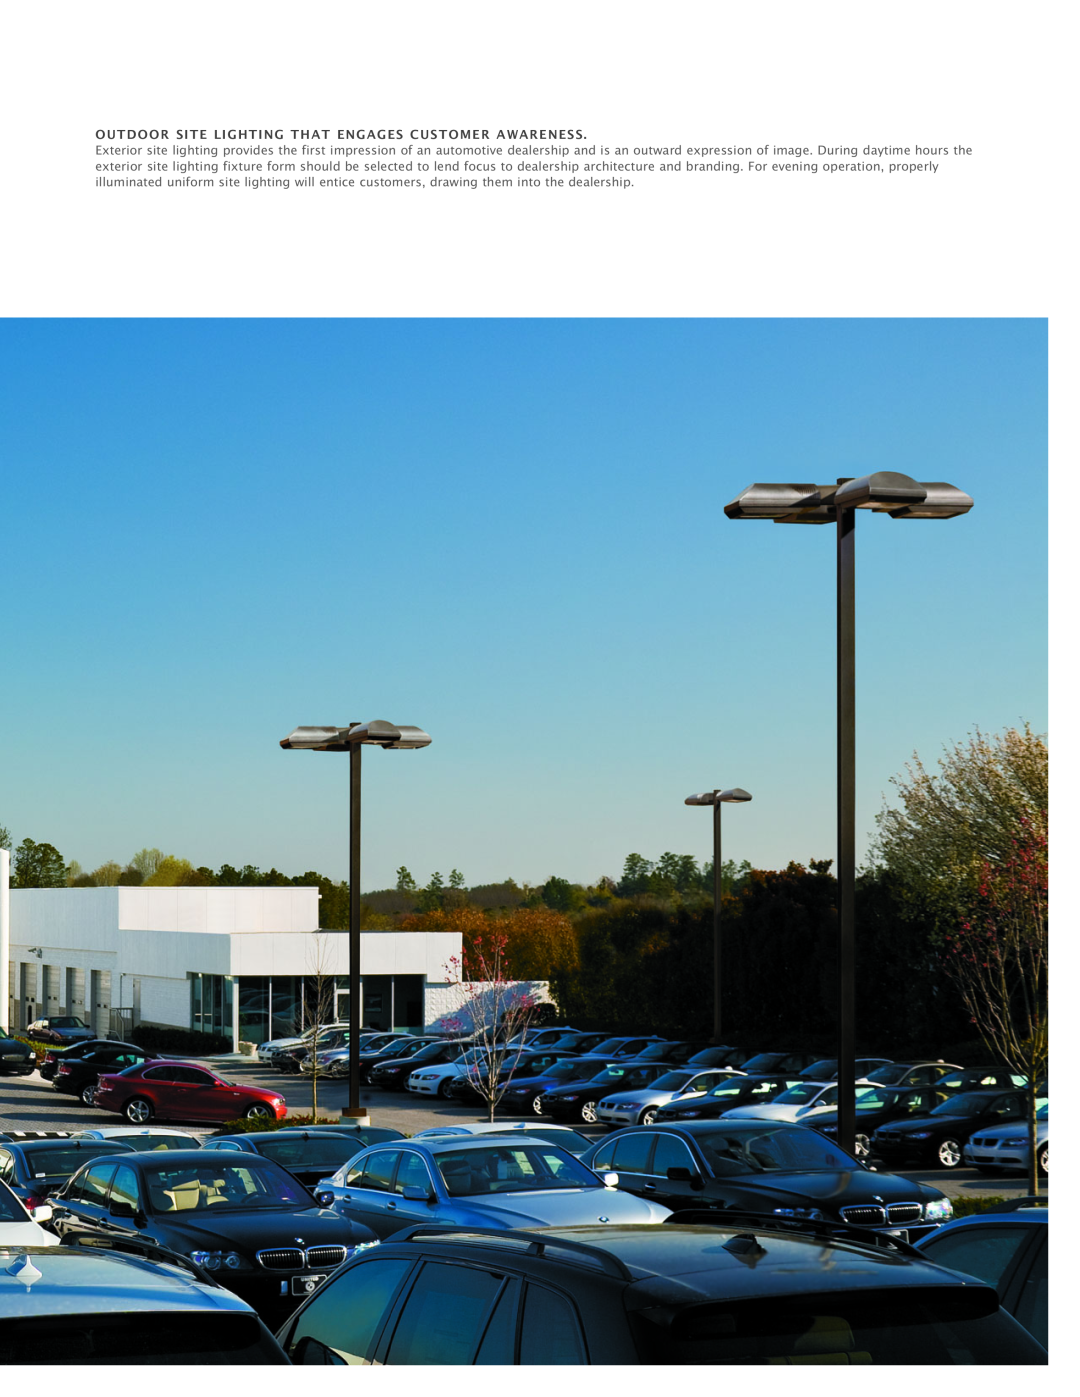 Cooper Lighting Architectural Area Luminaire manual Outdoor Site Lighting That Engages Customer Awareness 